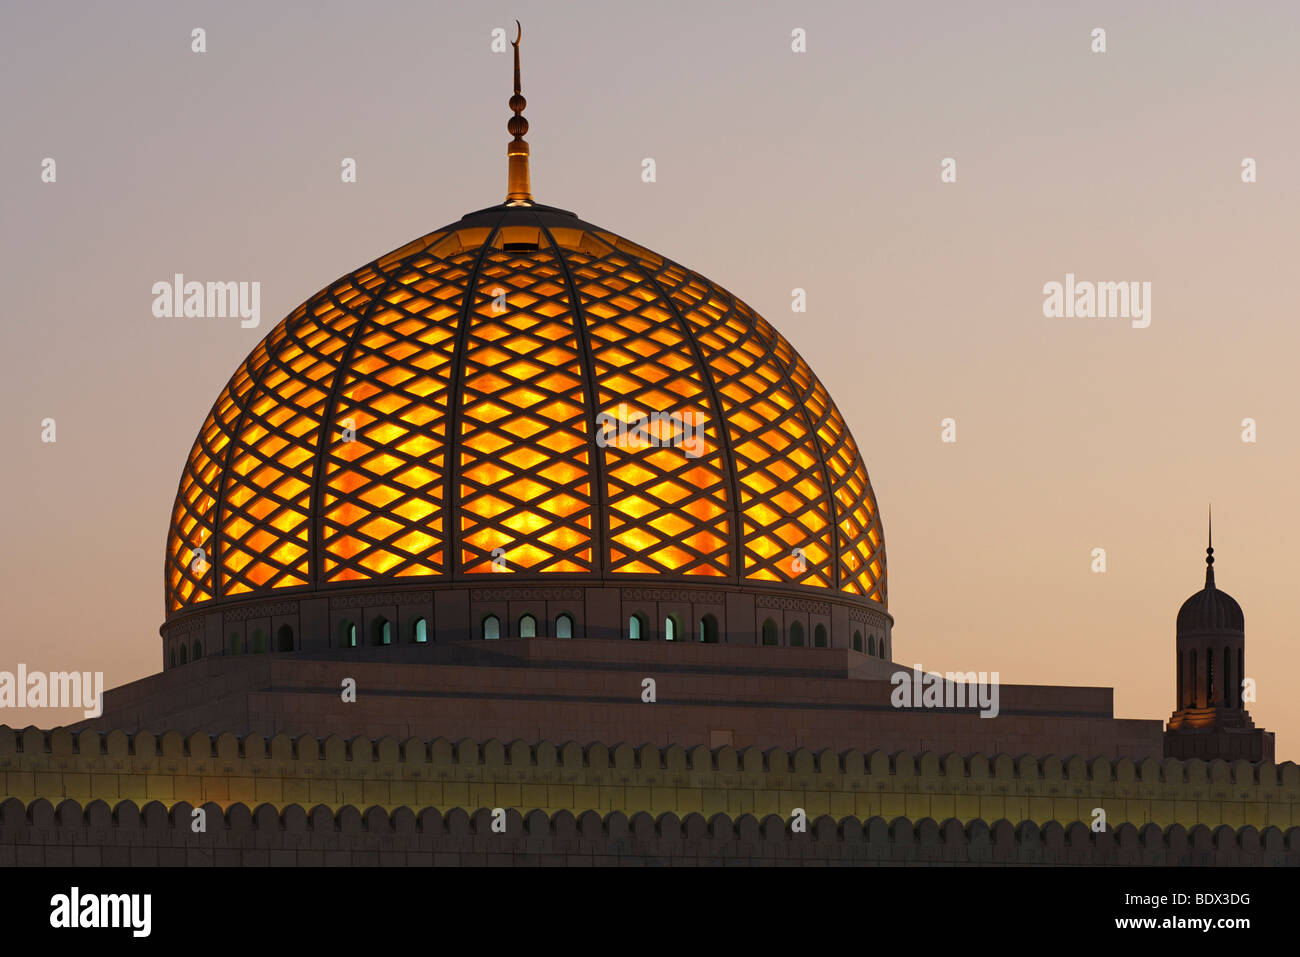 Illuminated dome of the Sultan Qaboos Grand Mosque, Muscat, Sultanate of Oman, Middle East Stock Photo